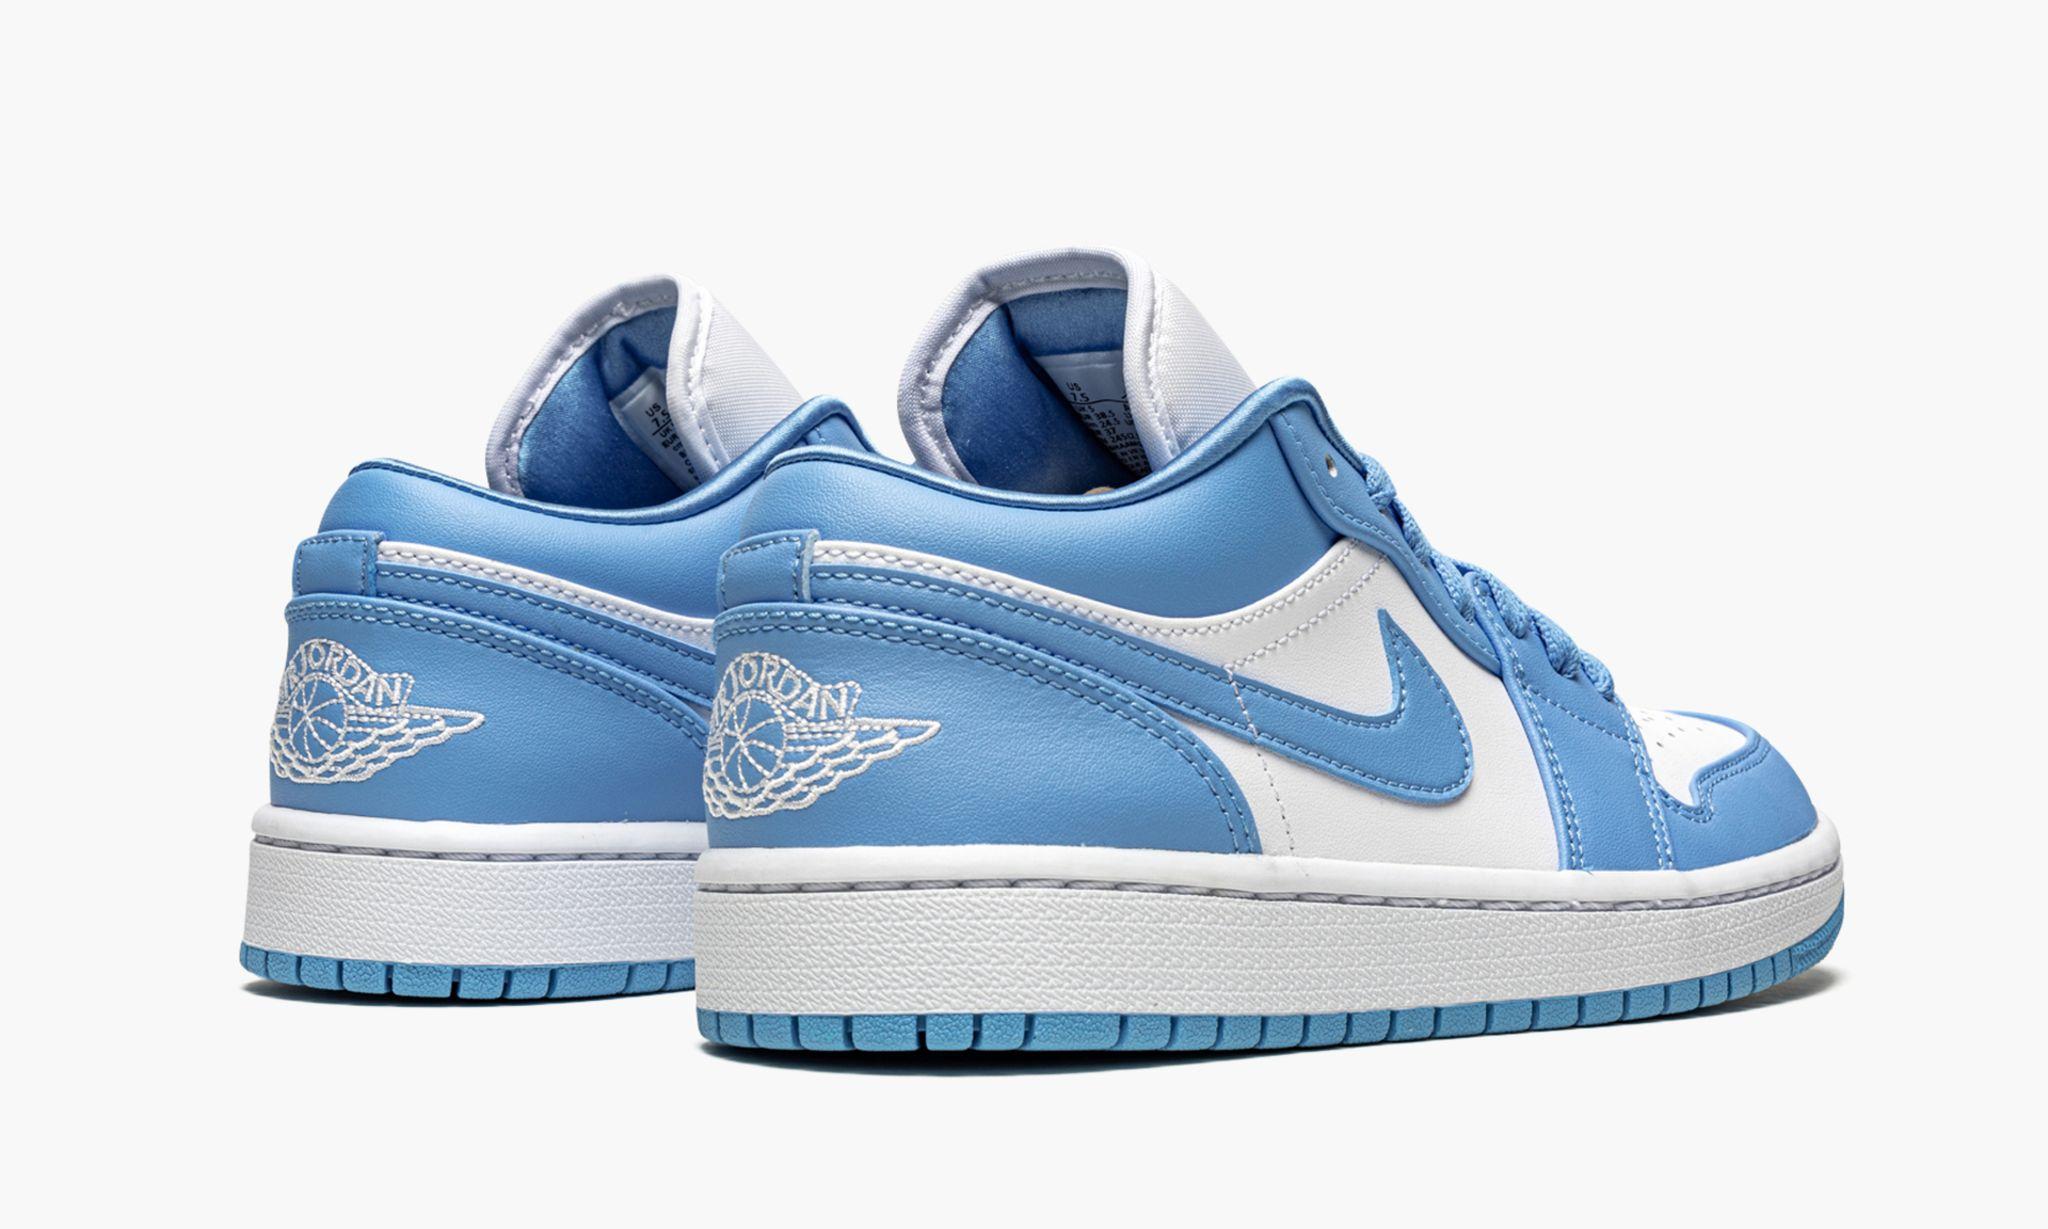 Nike Air 1 Low "unc" Shoes in Blue | Lyst